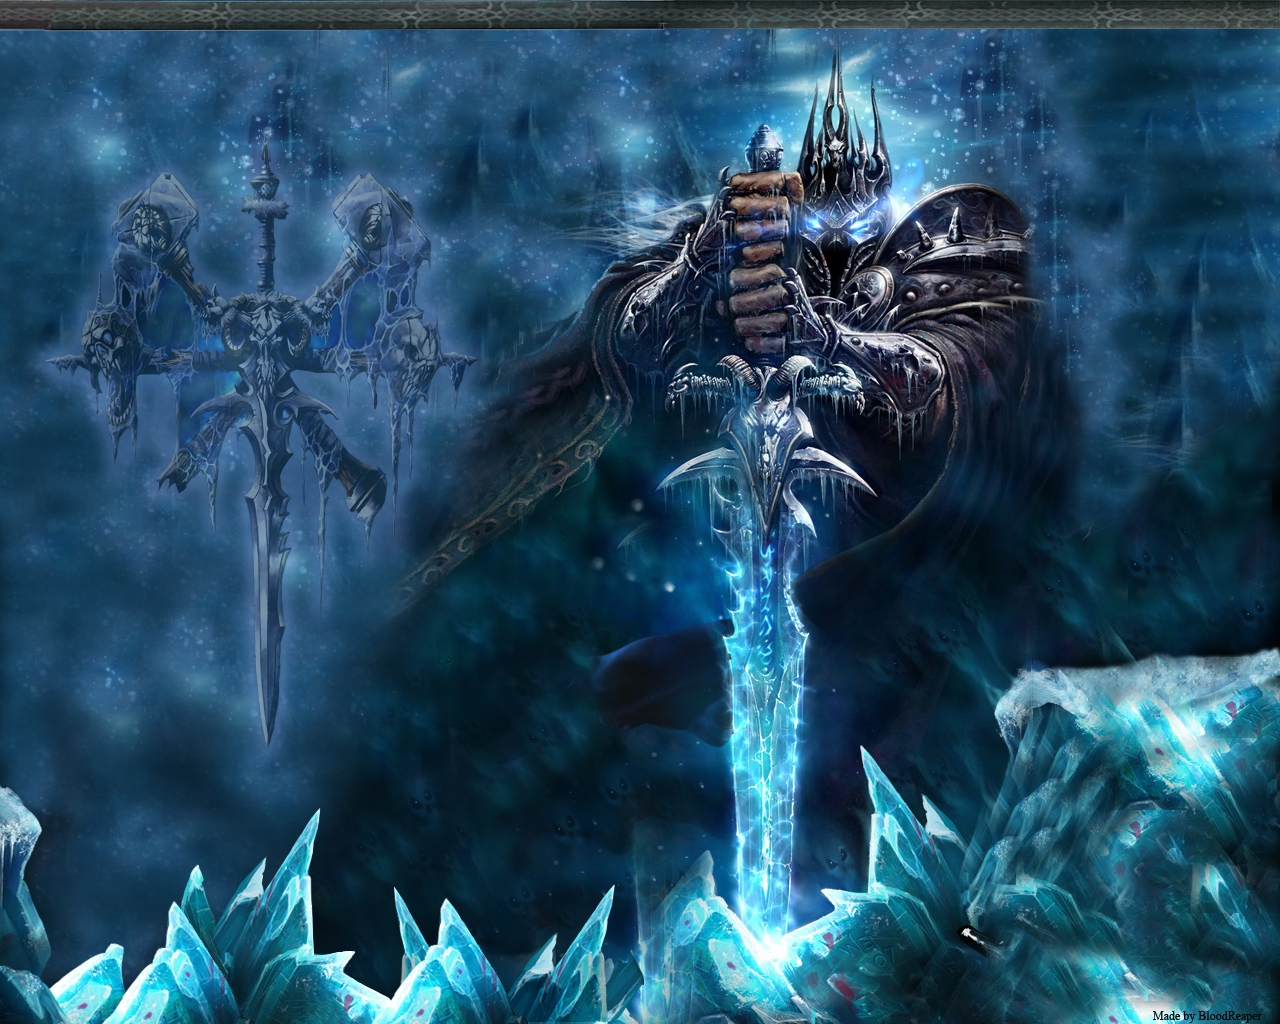 The Lich King will Answer for his Crimes Mind Spike